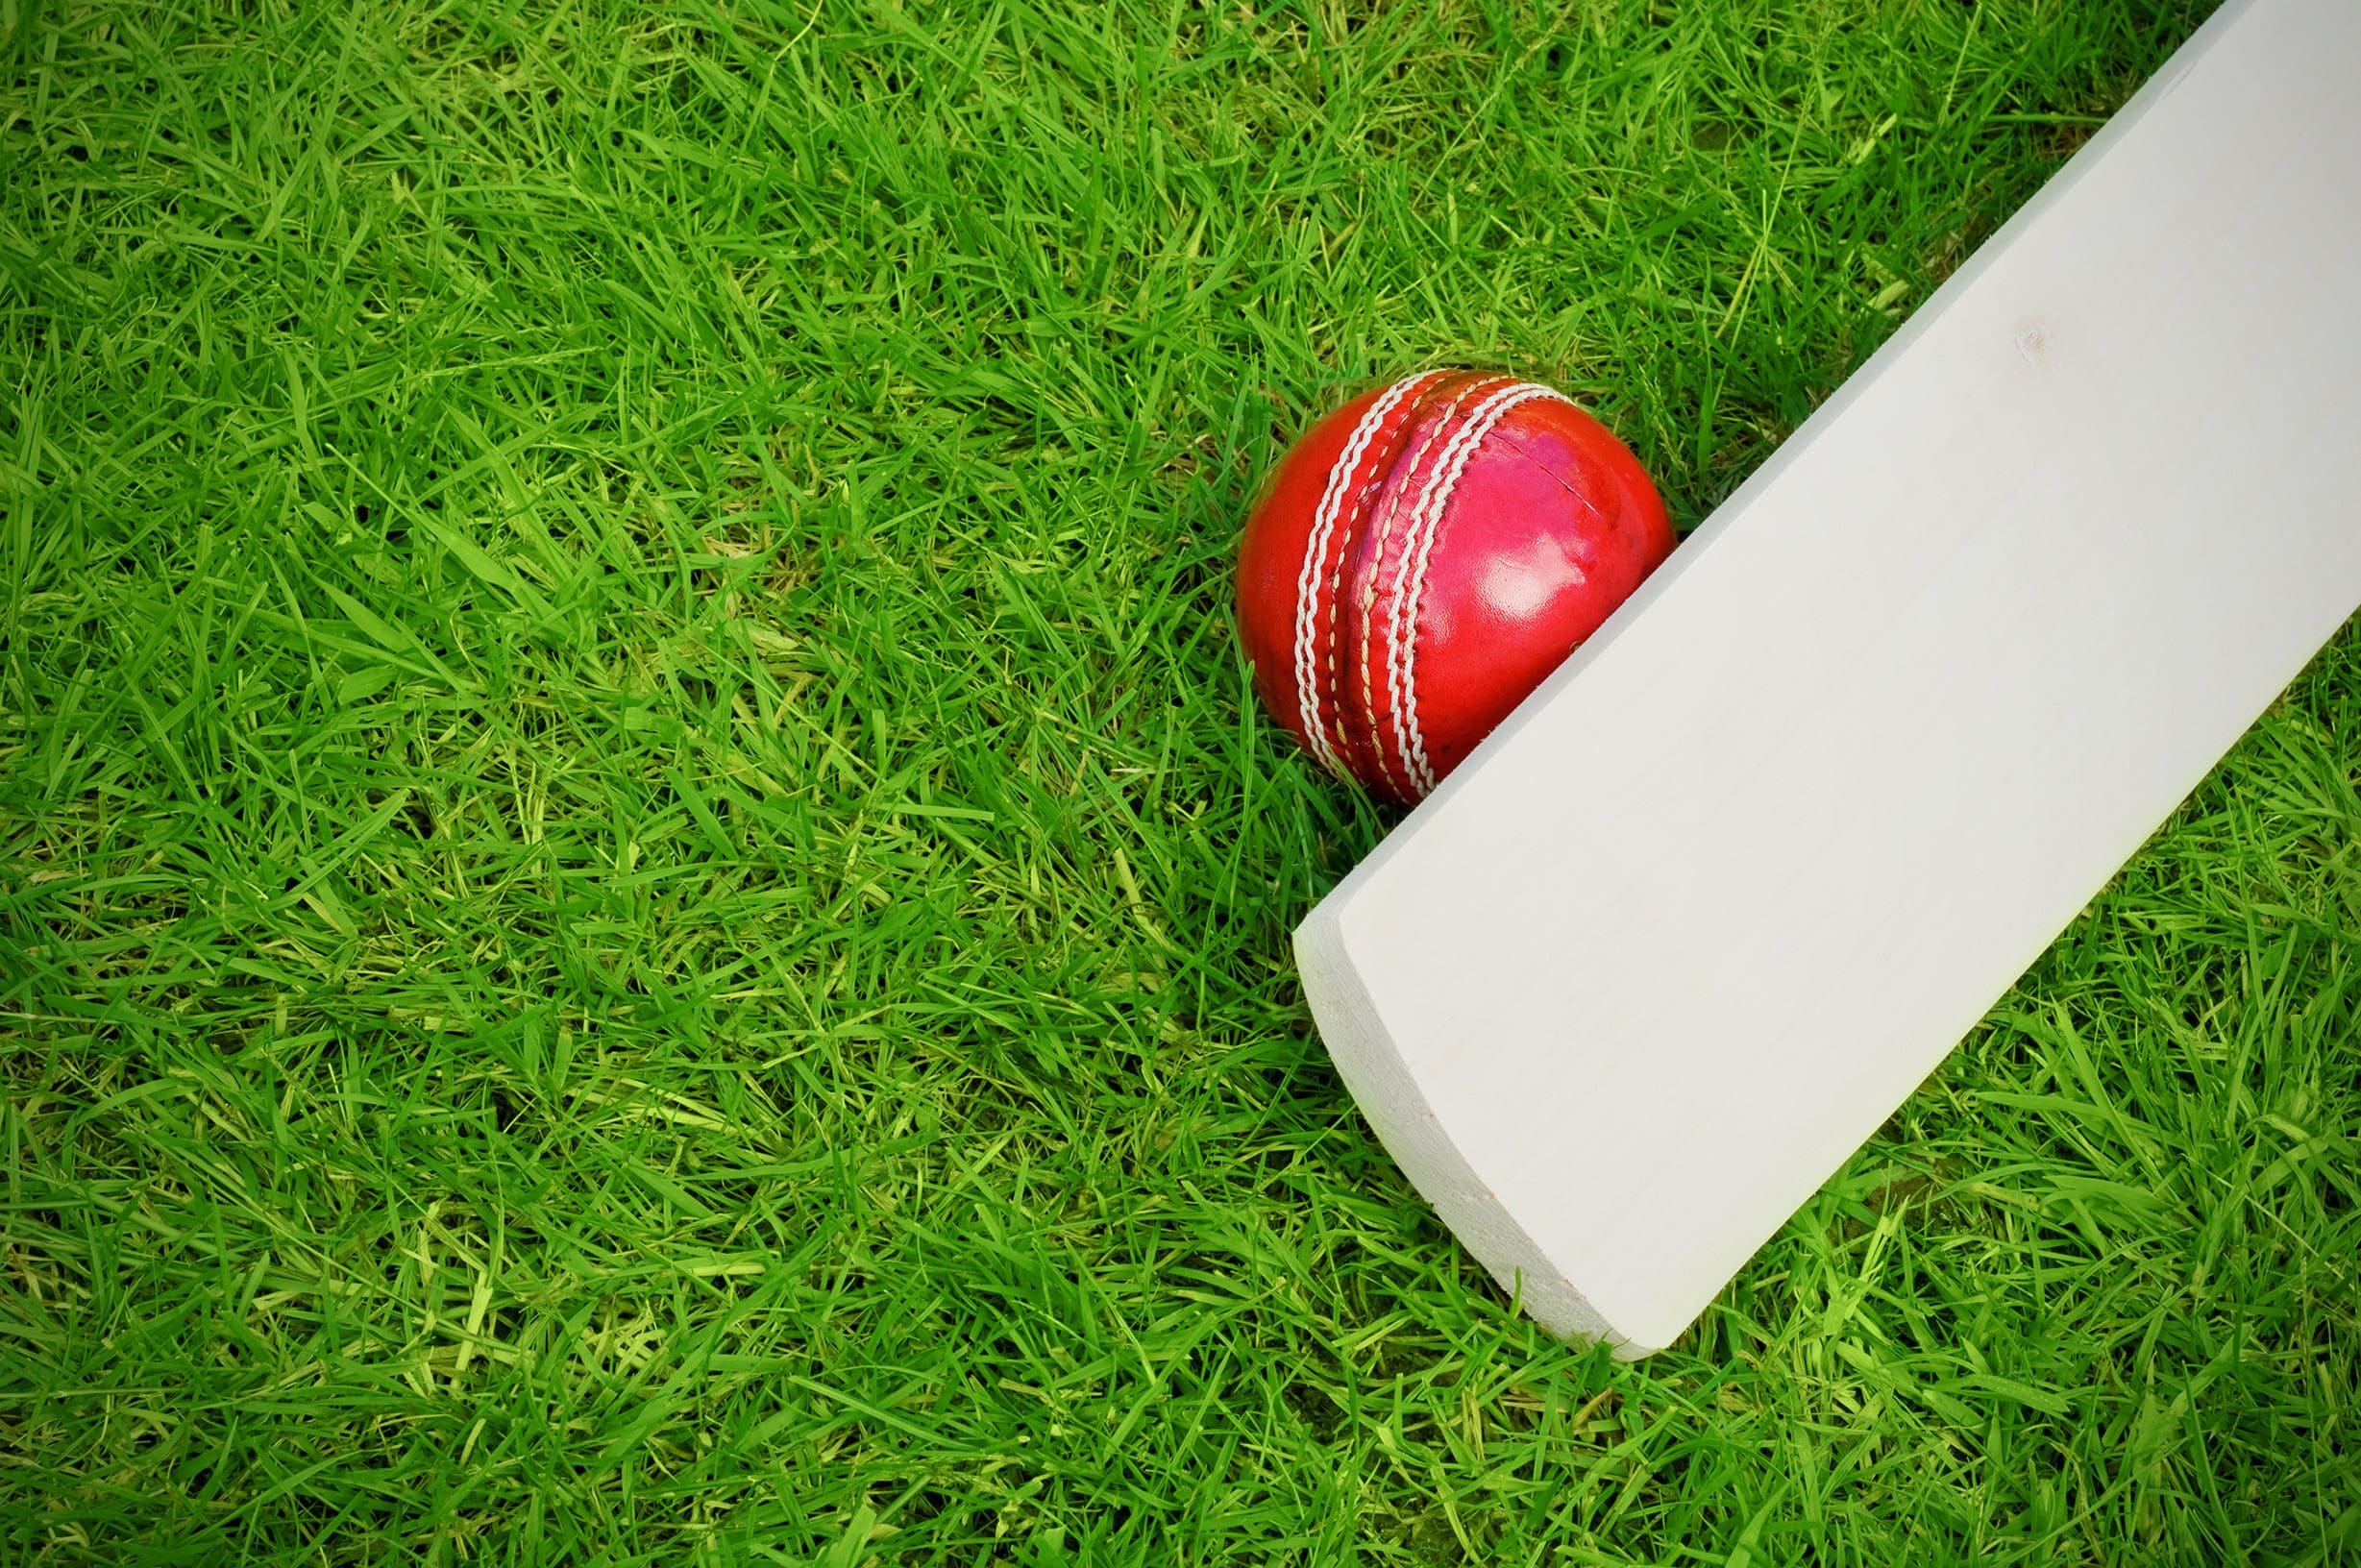 cricket featured image